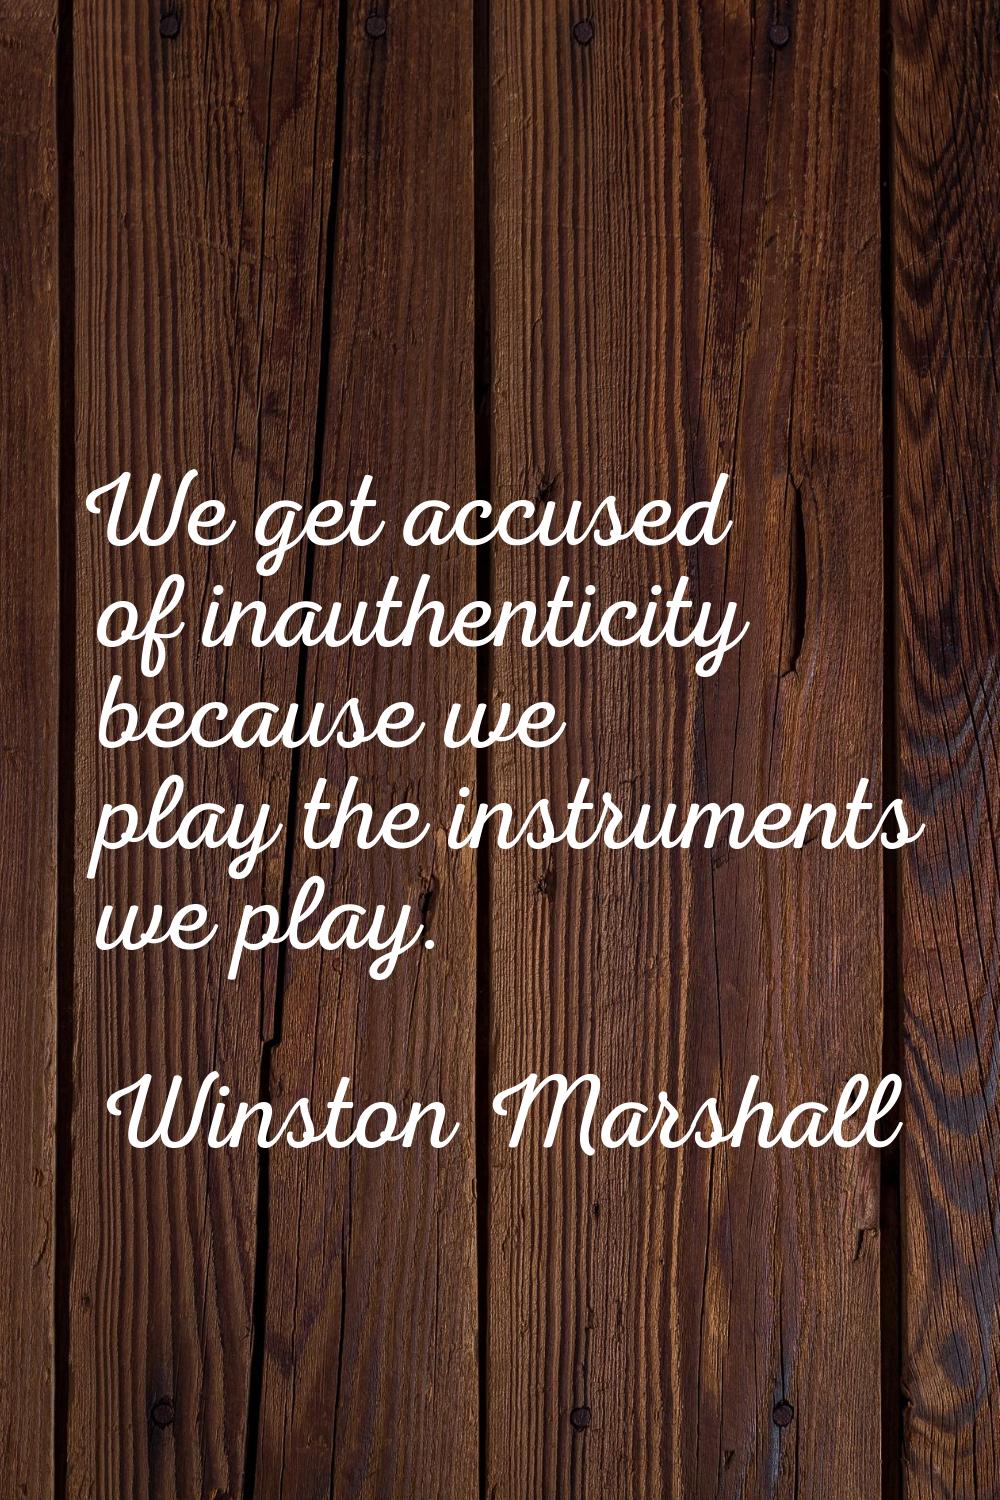 We get accused of inauthenticity because we play the instruments we play.